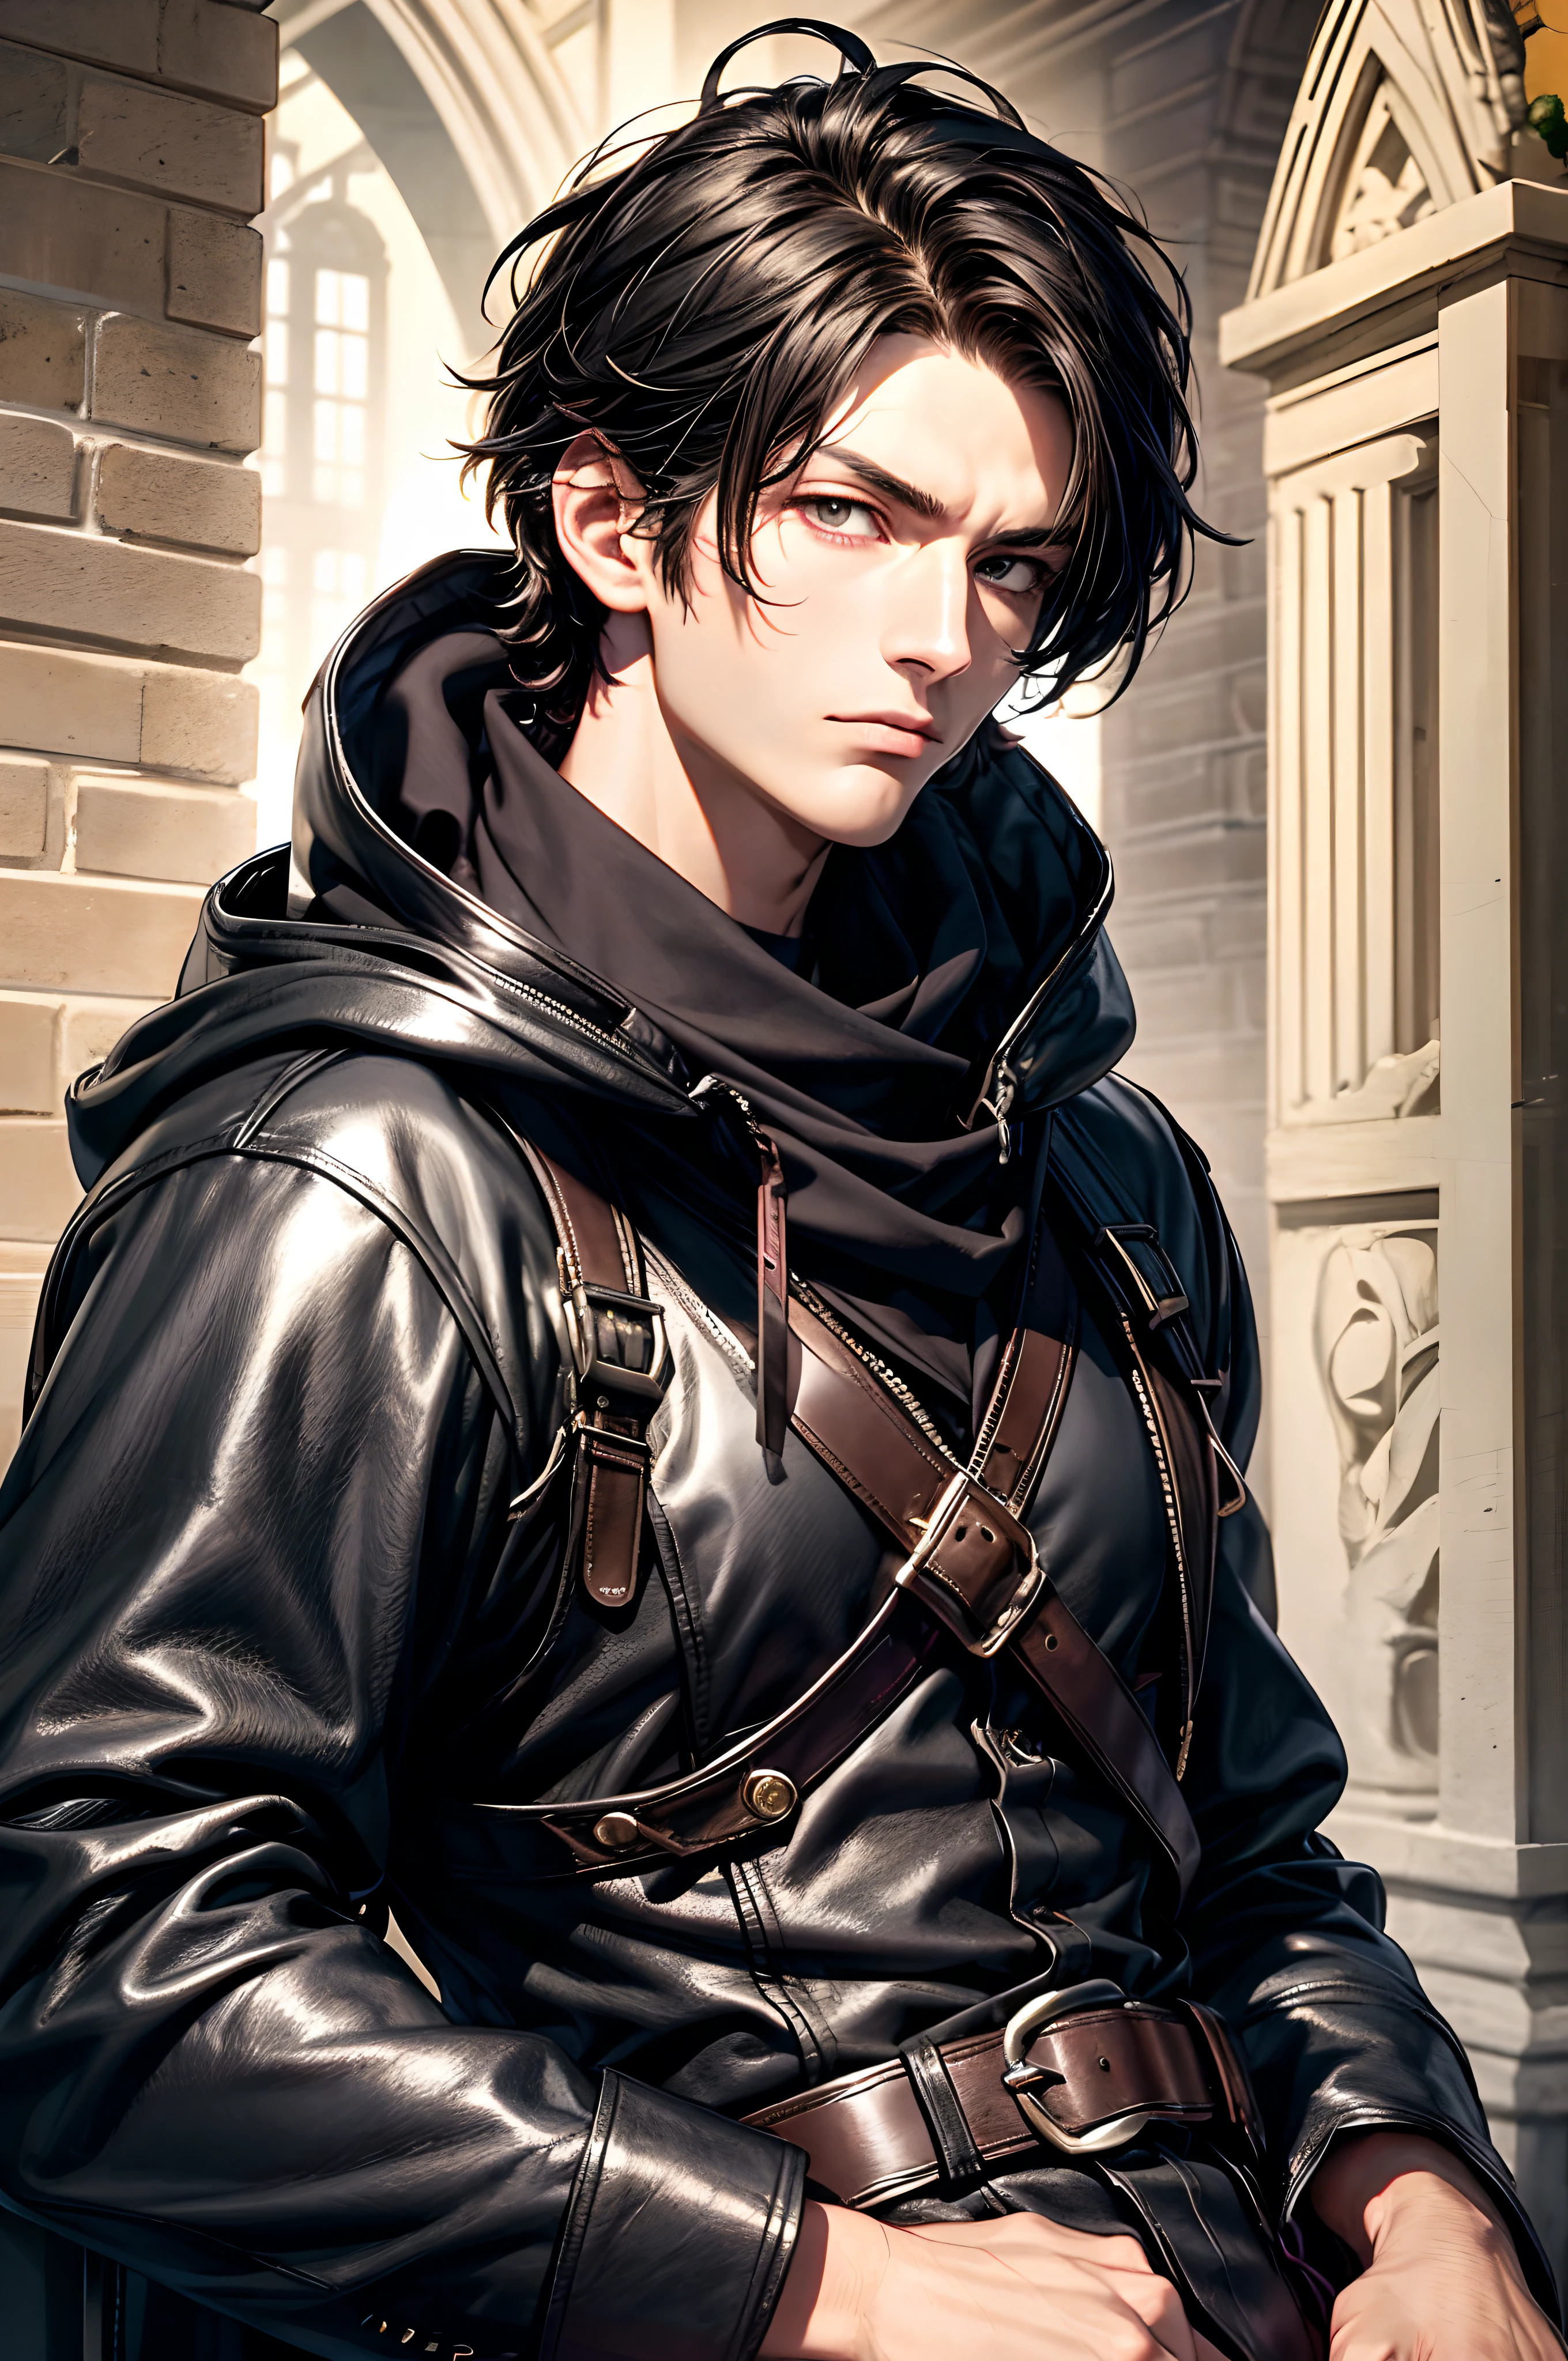 (absurderes, high resolution, ultra-detailed), 1 male, grown-up, Handsome, tall muscular face, broadshouldered, finely-detailed eyes, short black hair, eyes browns, black cloack, wearing a hoodie, leather vest, leather waist bag..............................., 2 daggers on the belt, castle, Medieval atmosphere, Natural Light and Shadow, Glowing particles fly around a person, Fantastic, uncanny, glowing radiance,  sitting pose, Serious expression, chilly, caring, cloused mouth